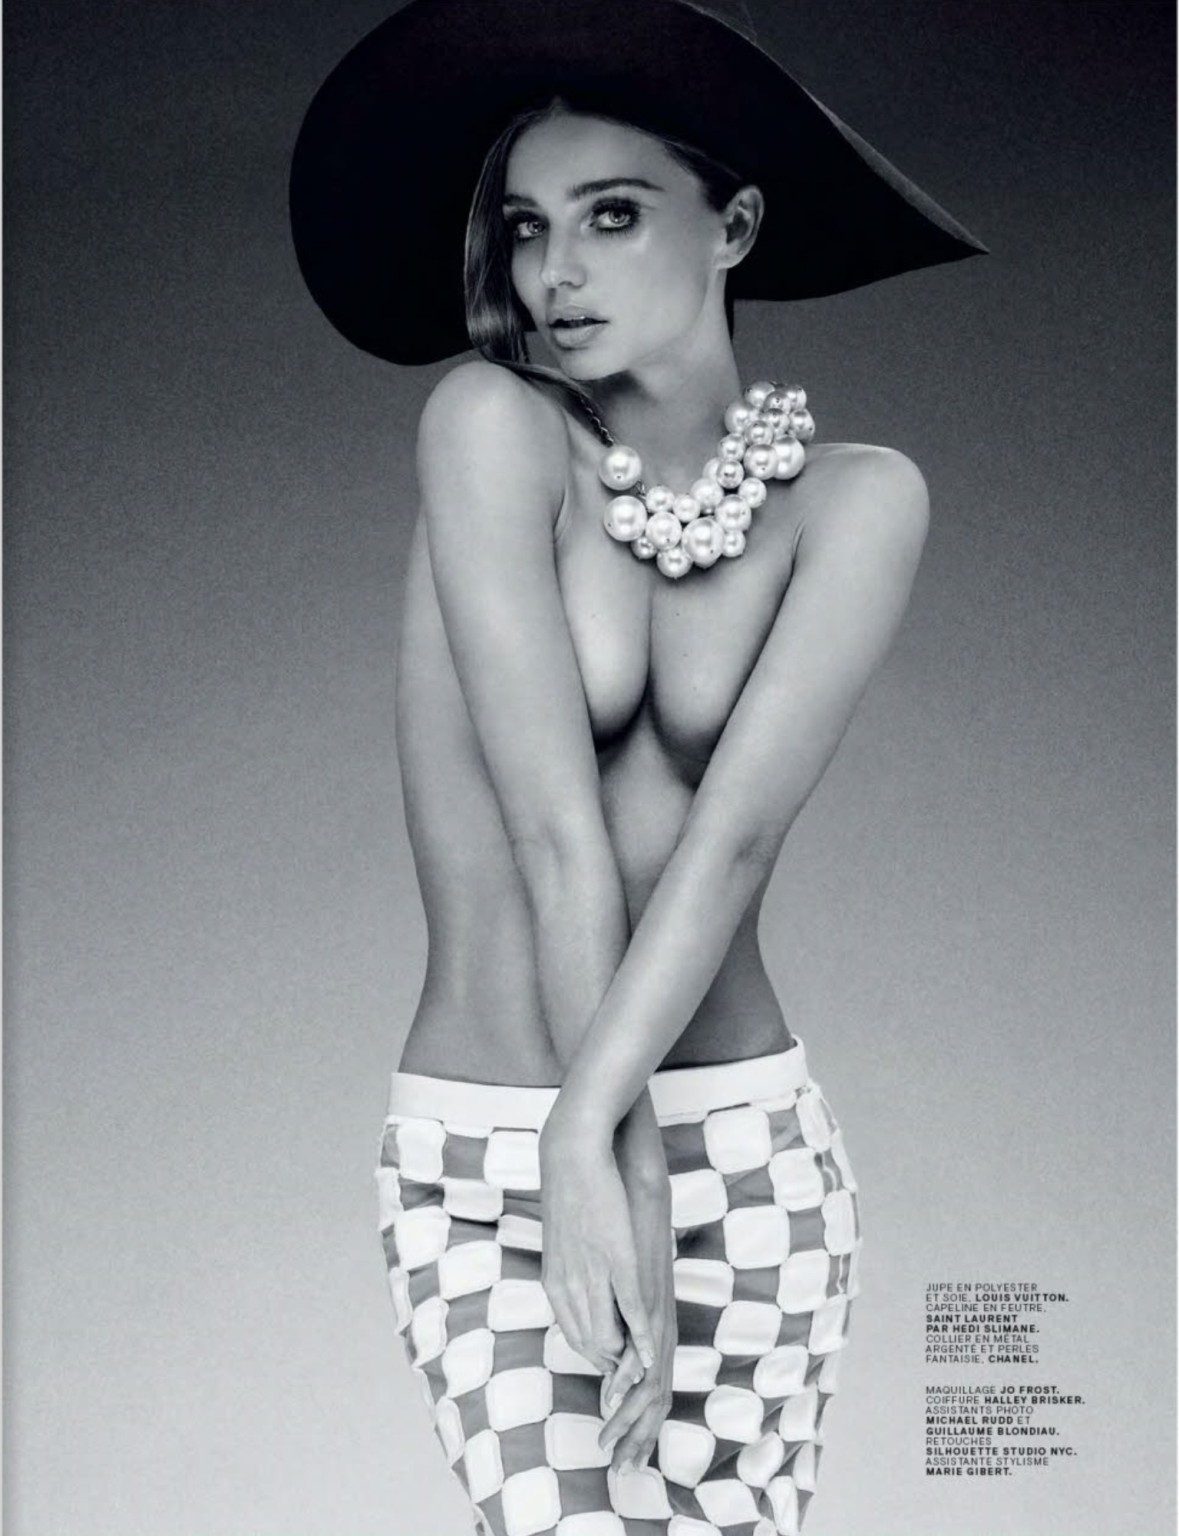 Miranda Kerr topless but hiding her boobs in February 2013 issue of Jalouse Maga